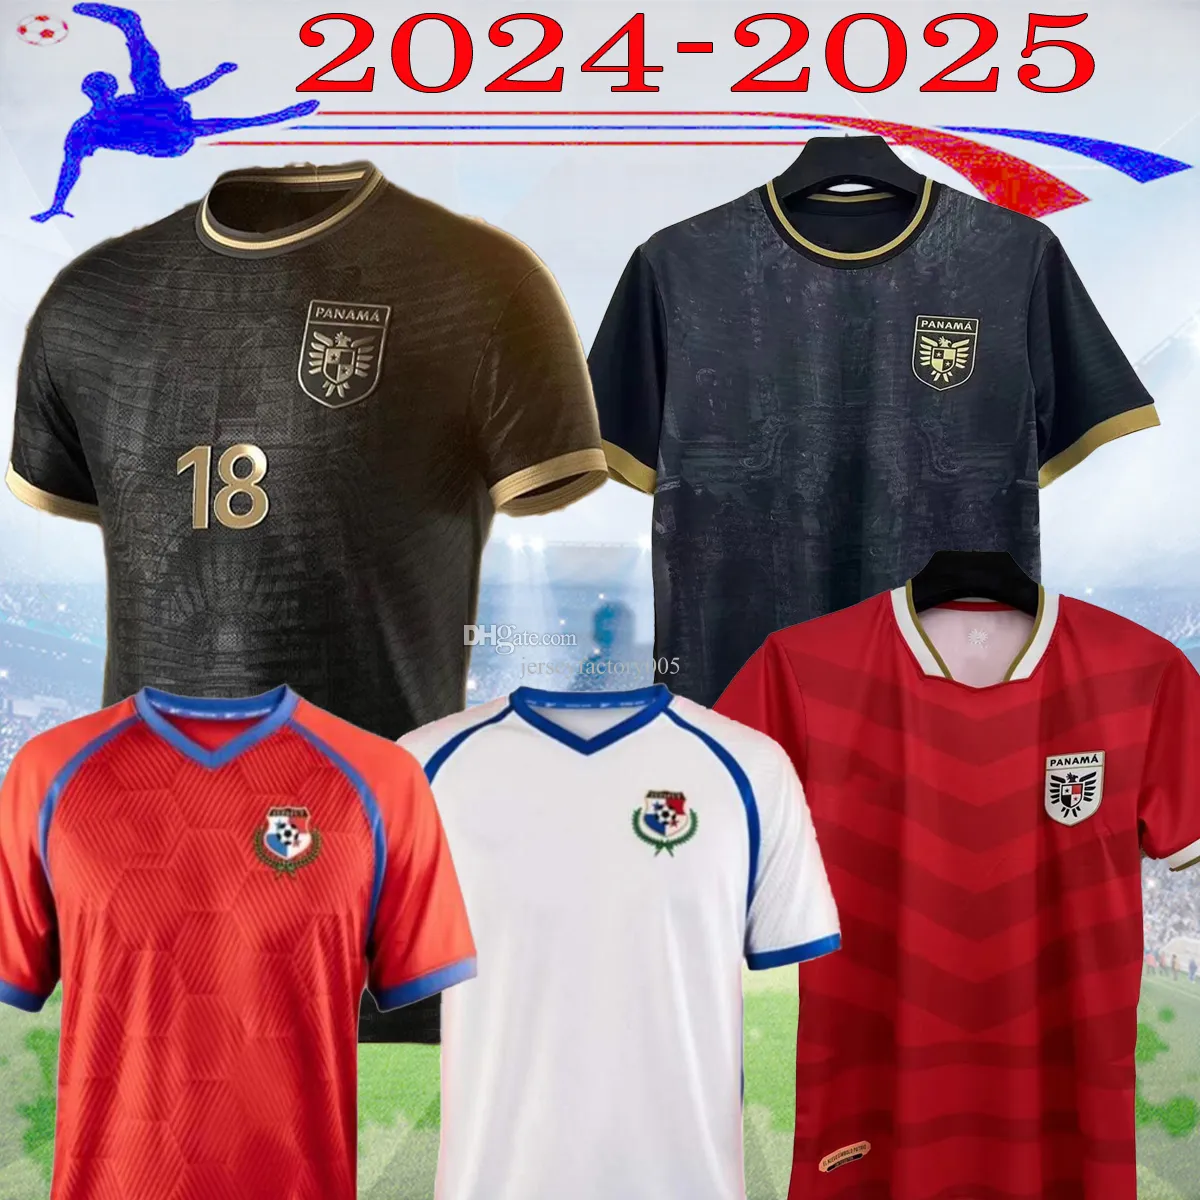 2024 2025 PANAMA NATIONALE TEAM VOETBAL JERSEYS COX TANNER 24 25 BLACK CARRASQUILA GODOY HOME ROOD ROOD WIT WITTE MENS VOLGENDE SHIRTS